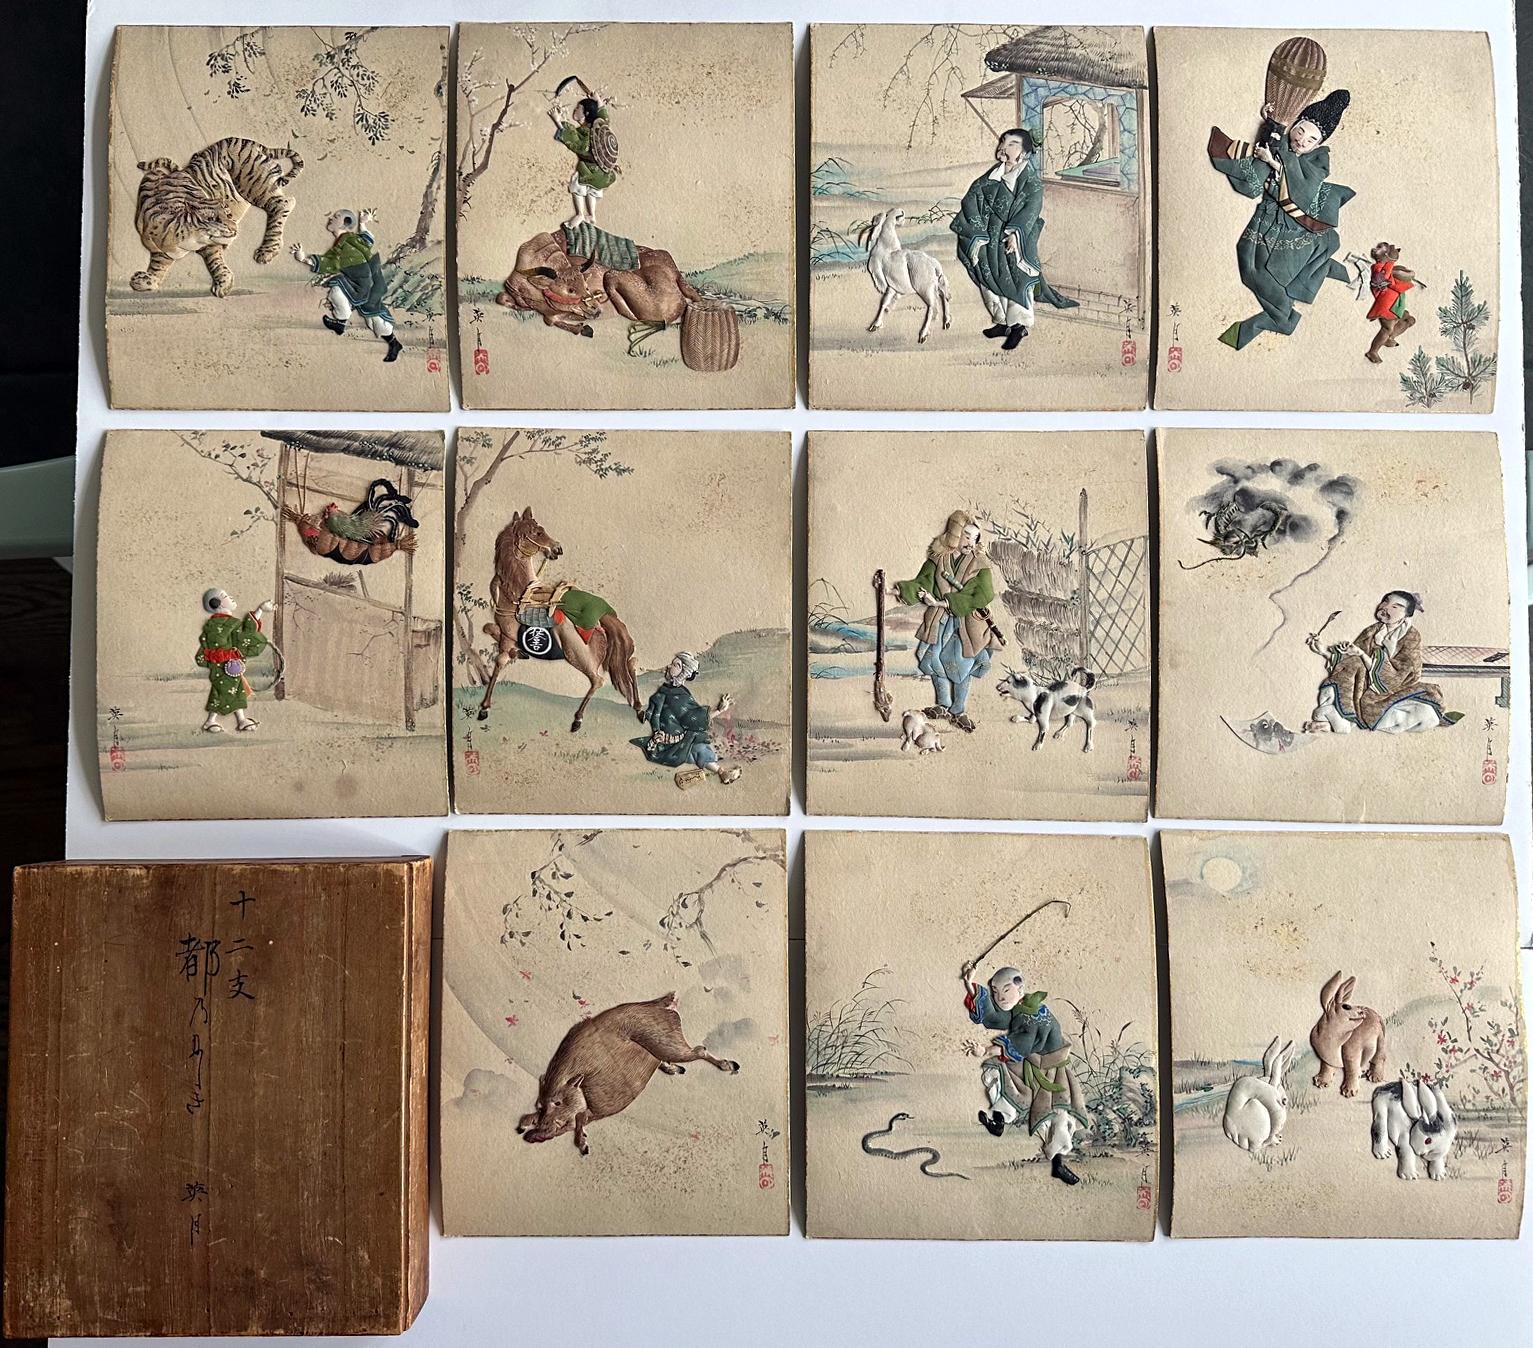 On offer here is a rare set of eleven Japanese textile art with painting panels called Oshi-E circa Meiji Period (1868-1912). This unusual set of panels depict various composition of oriental figures, animals and plants (even including a nanban